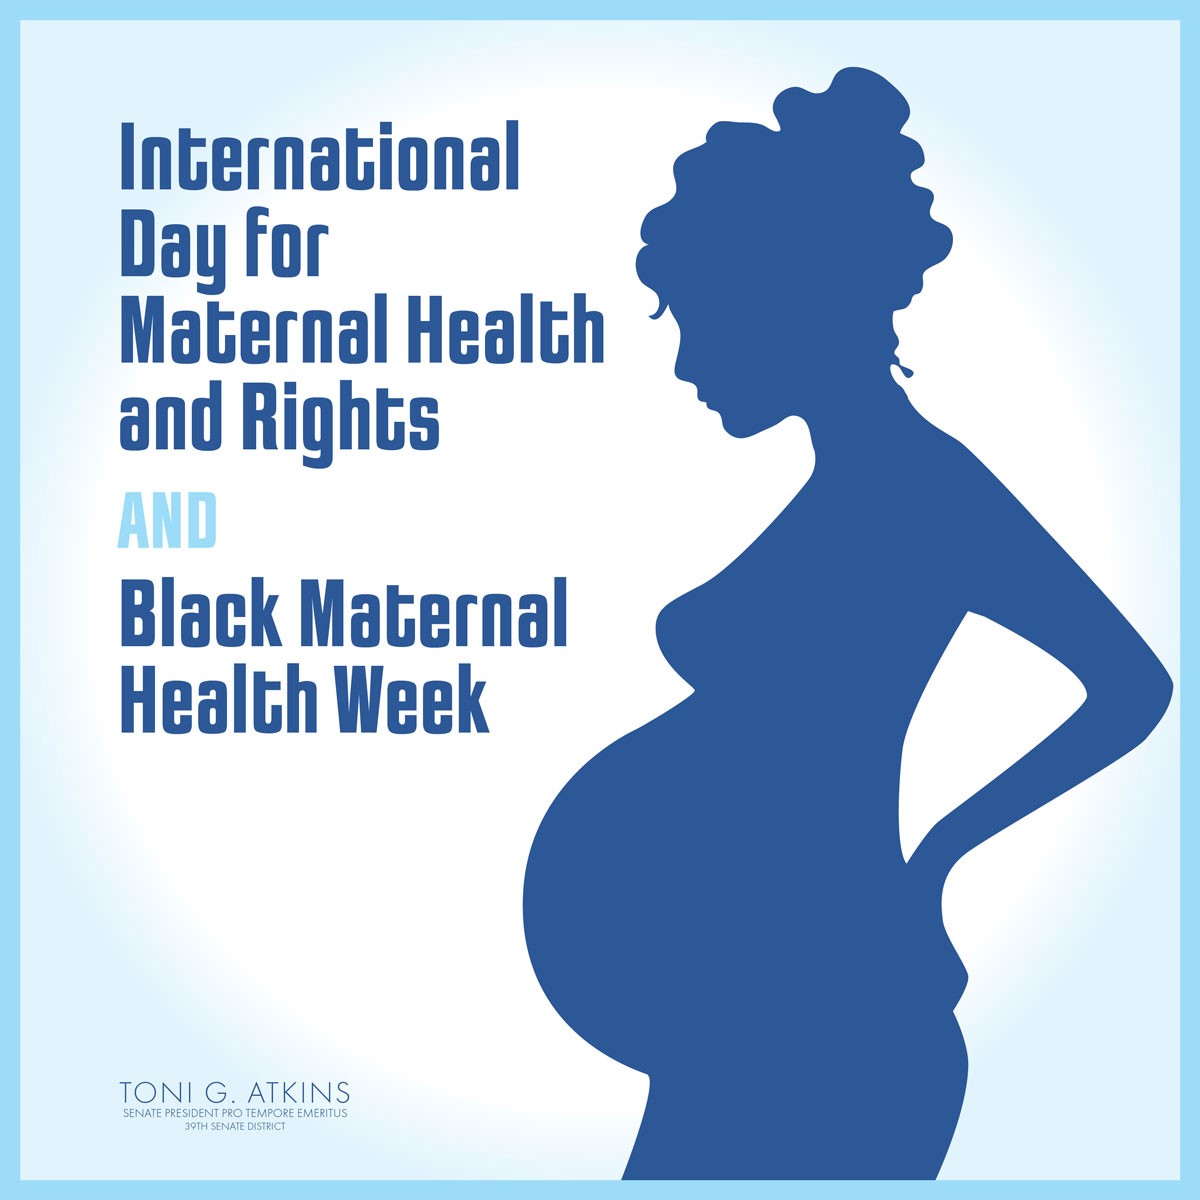 Black women are far more likely to die in childbirth than white women. CA is a leader in requiring implicit bias training for perinatal workers, but we must keep working to eliminate medical bias and ensure ALL mothers have access to quality maternal health care.